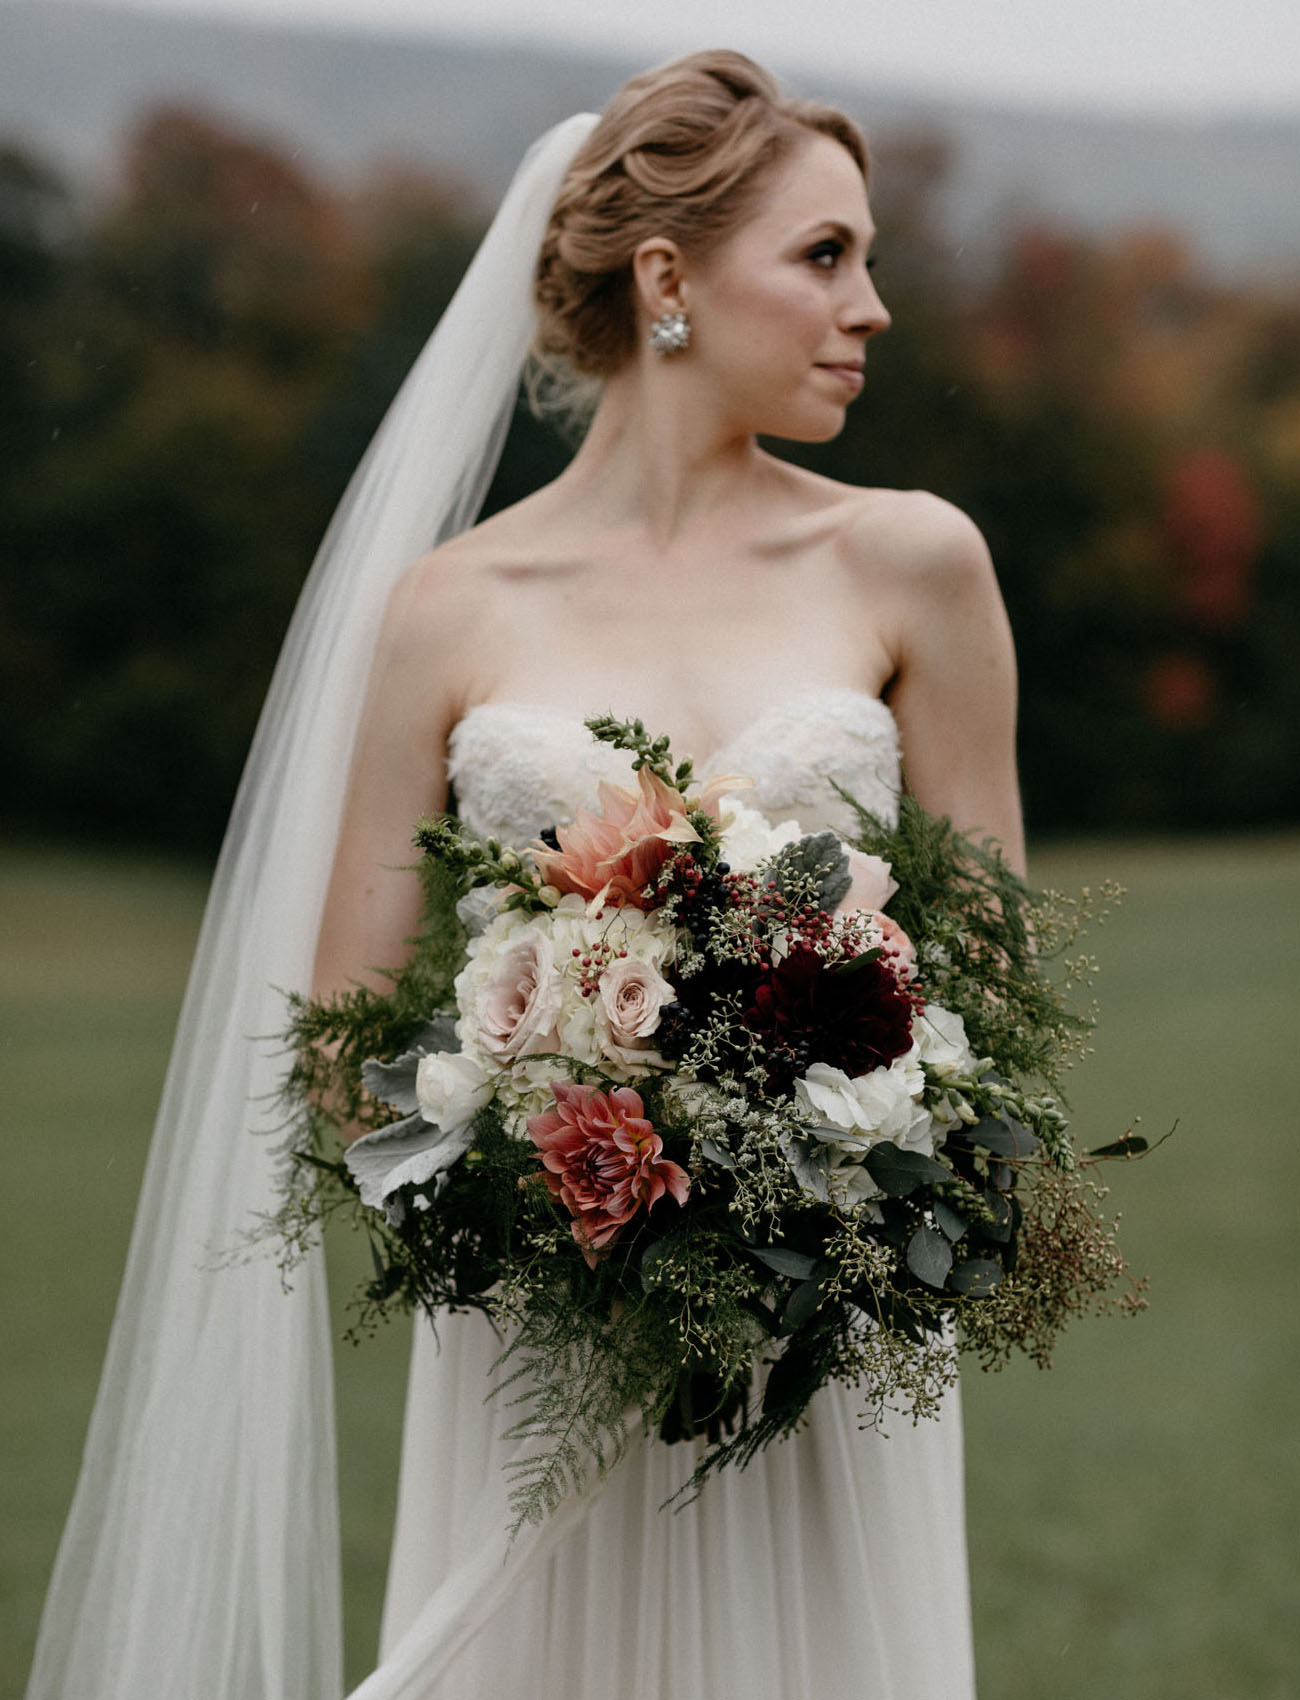 This fall wedding was a vintage inspired one as the couple owns a 200 year old house, where the wedding took place